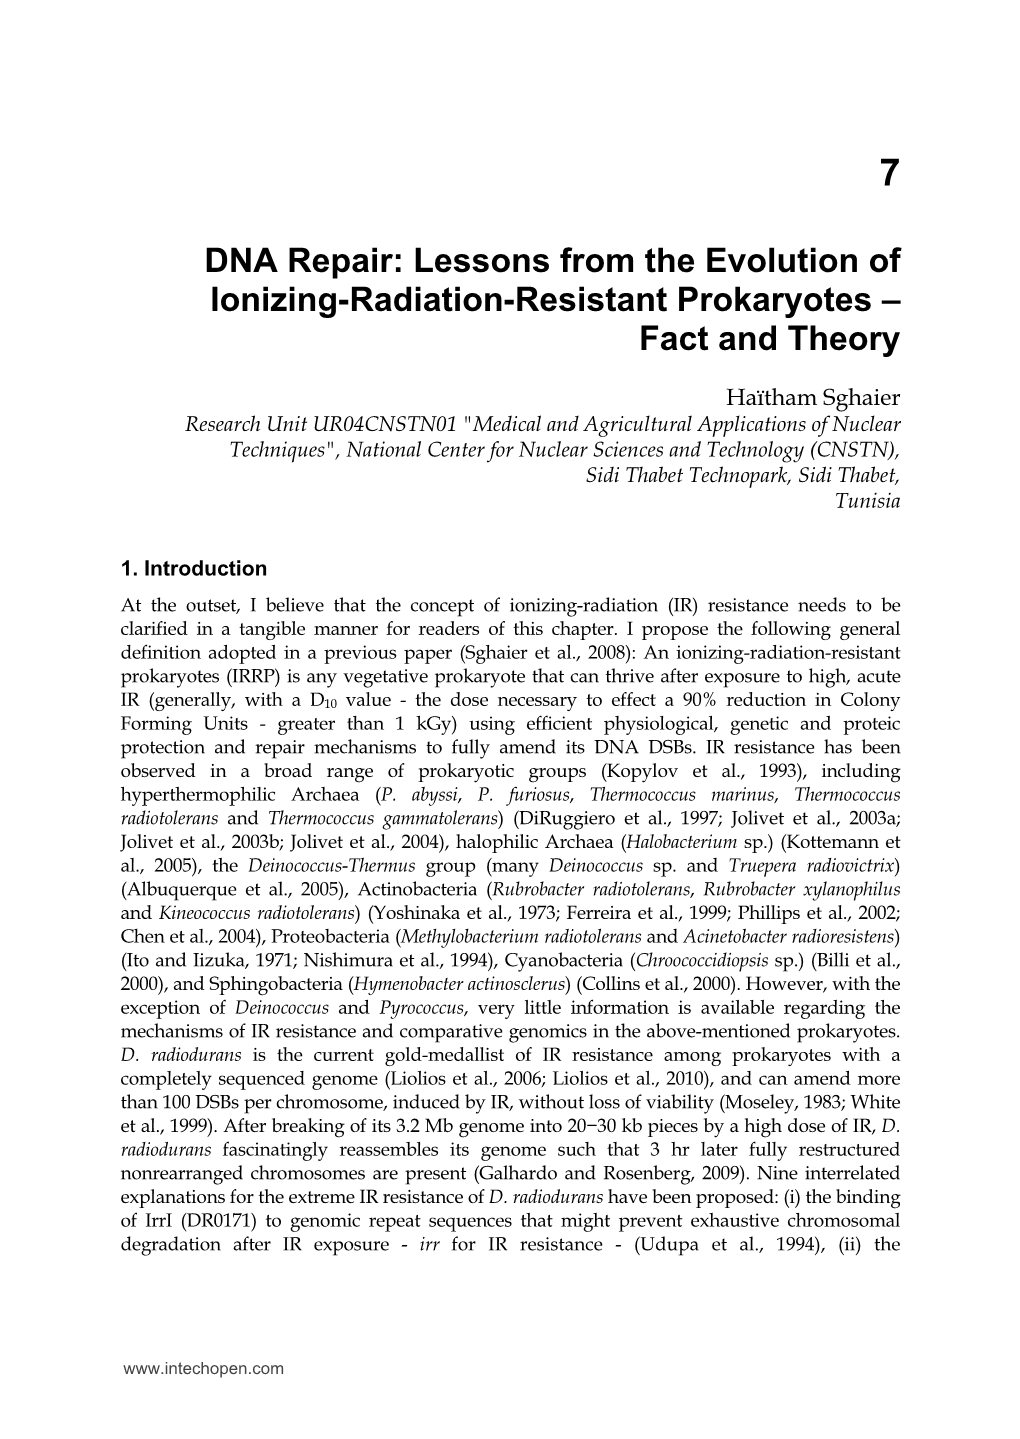 DNA Repair: Lessons from the Evolution of Ionizing-Radiation-Resistant Prokaryotes – Fact and Theory